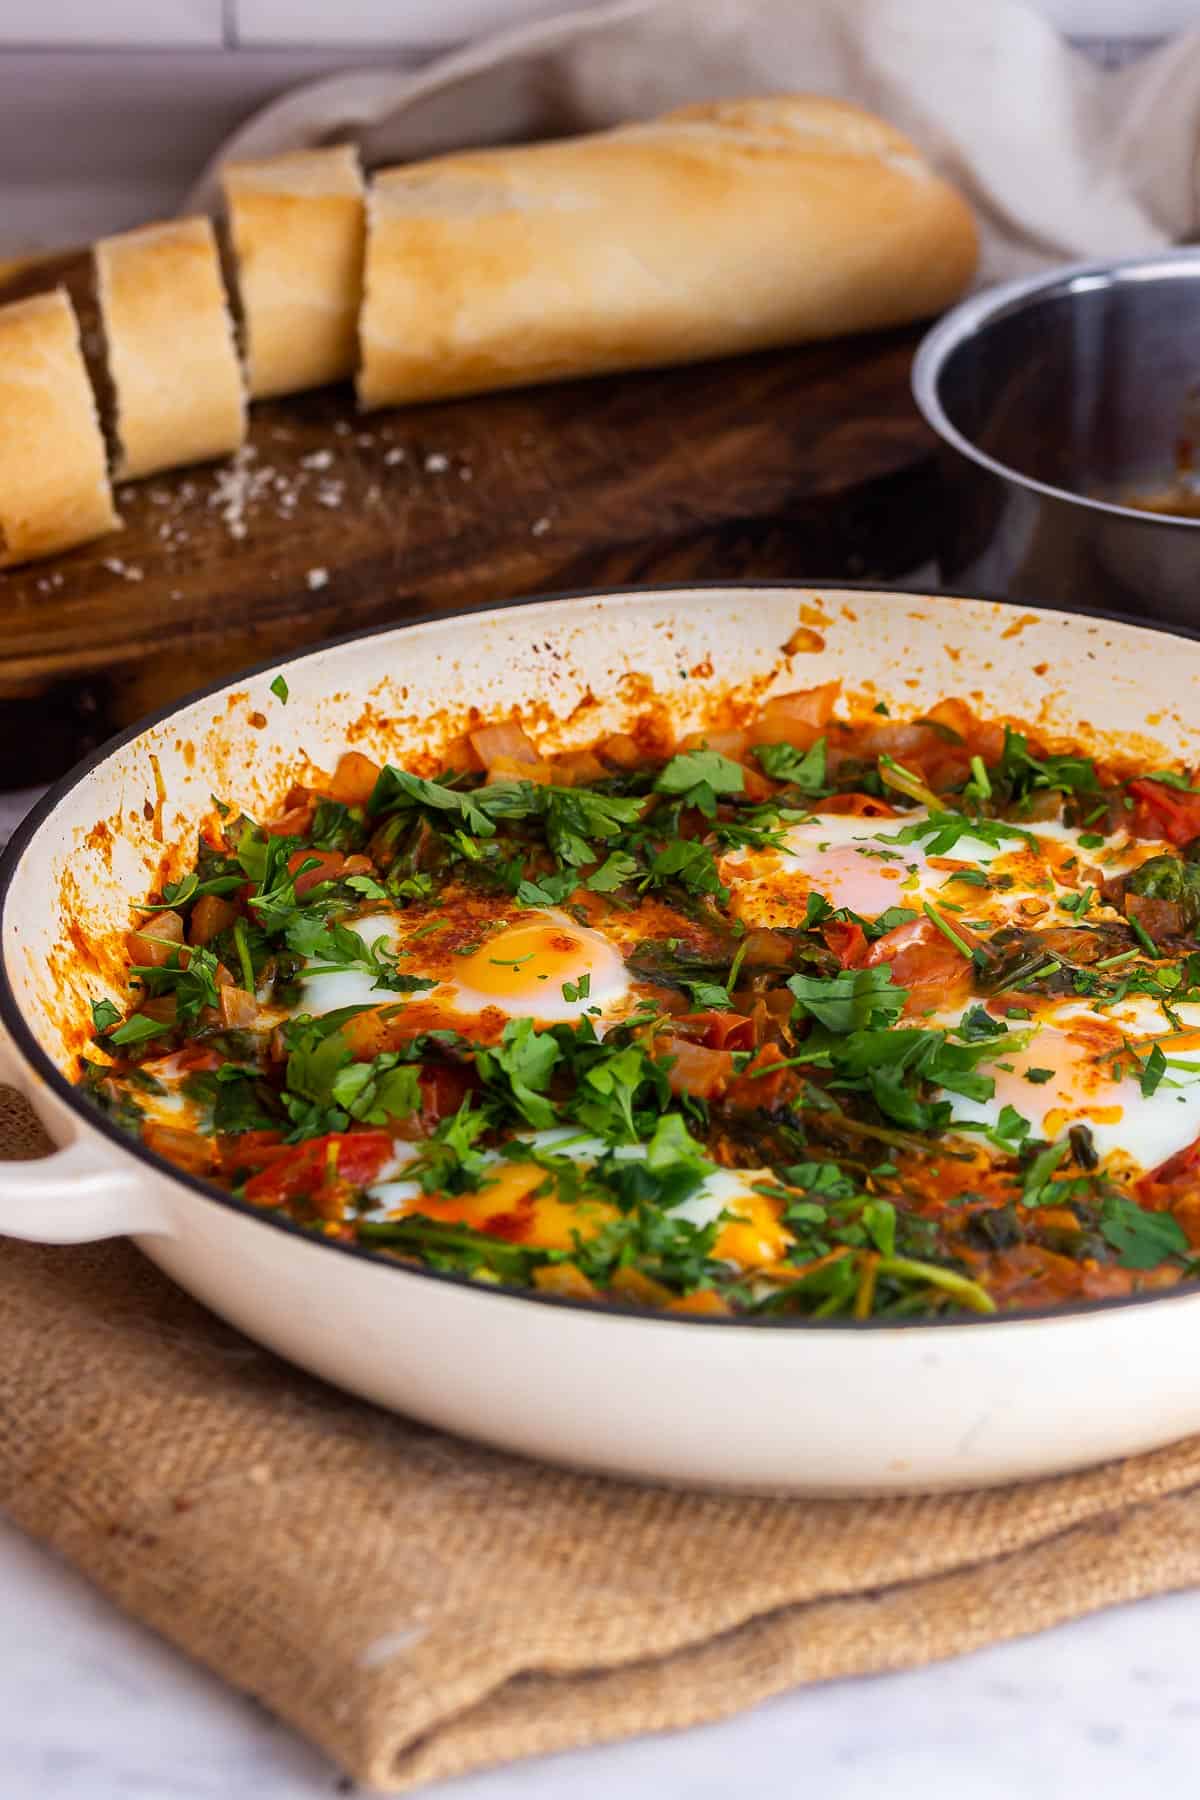 White pan of eggs in tomato sauce with herbs